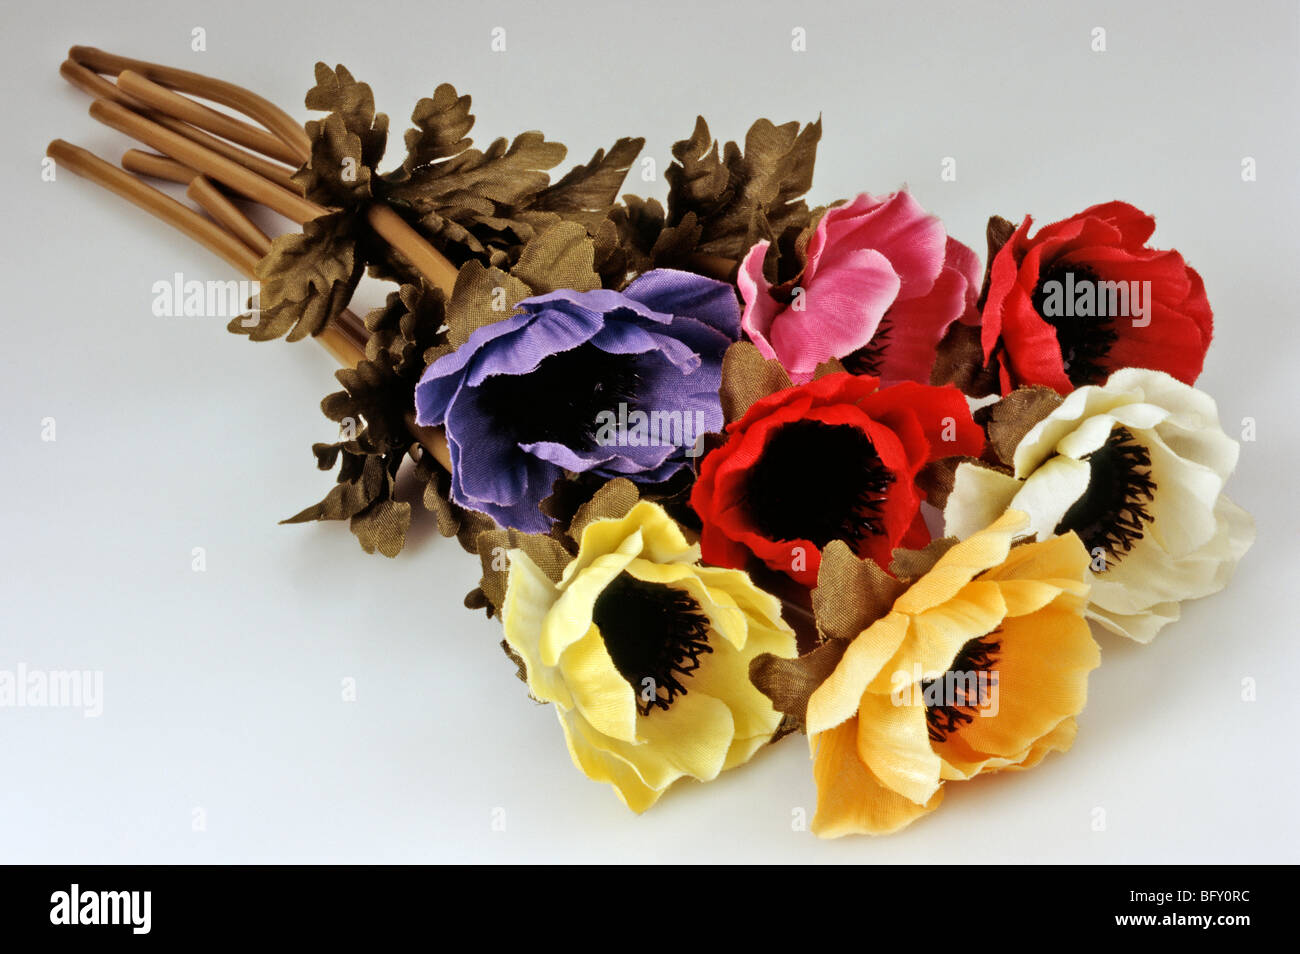 Small Artificial Flowers. stock photo. Image of decoration - 36482748